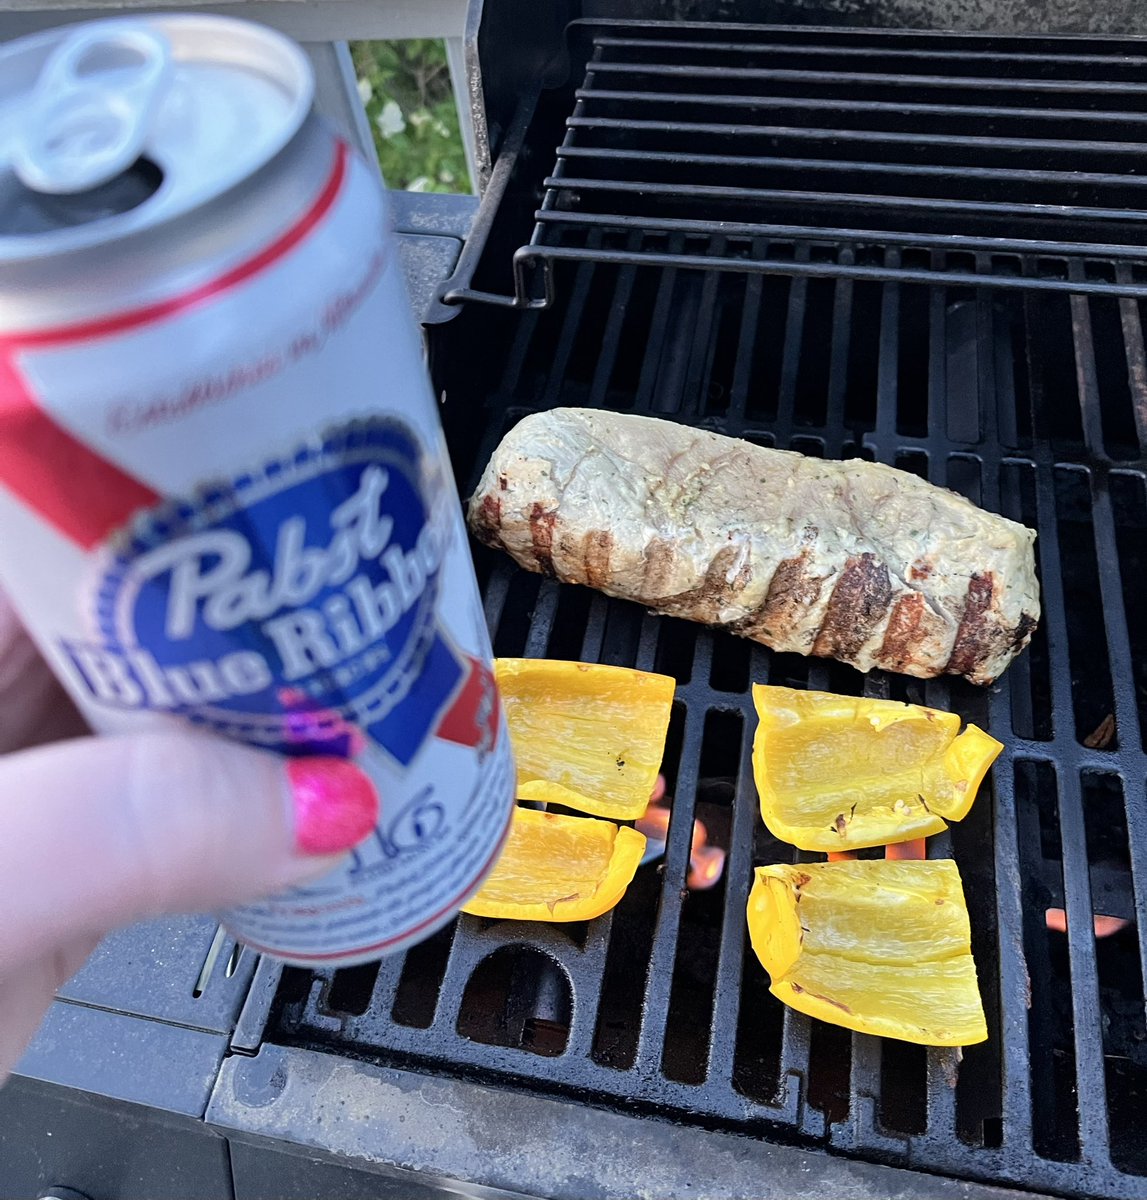 First grill of the season. Got some cheap beer, some garlic and lemon marinated pork loin, some bell pepper, some broccoli steaming inside, some Sturgill Simpson blasting on a speaker, dancing on my back porch. Life is good.